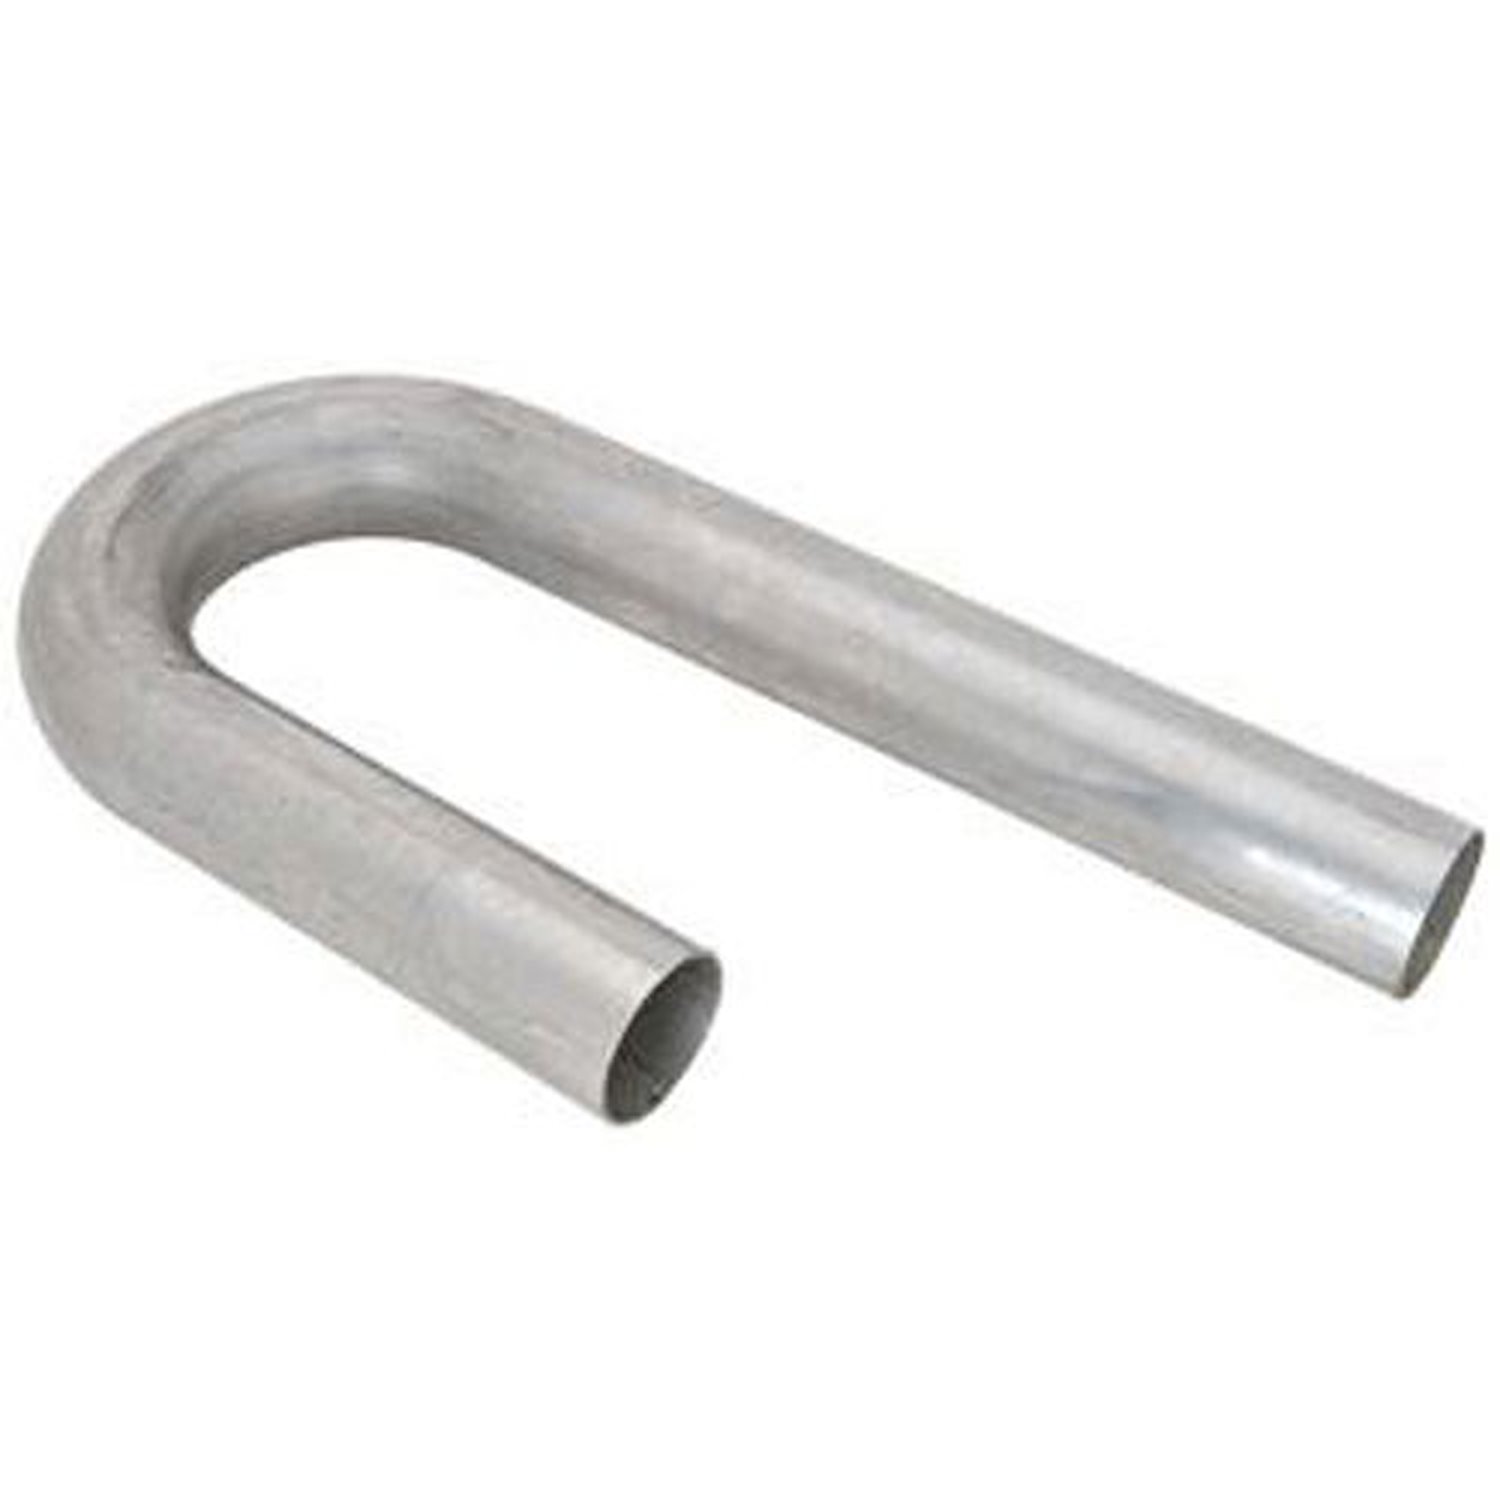 Stainless Steel 2" J-Bend